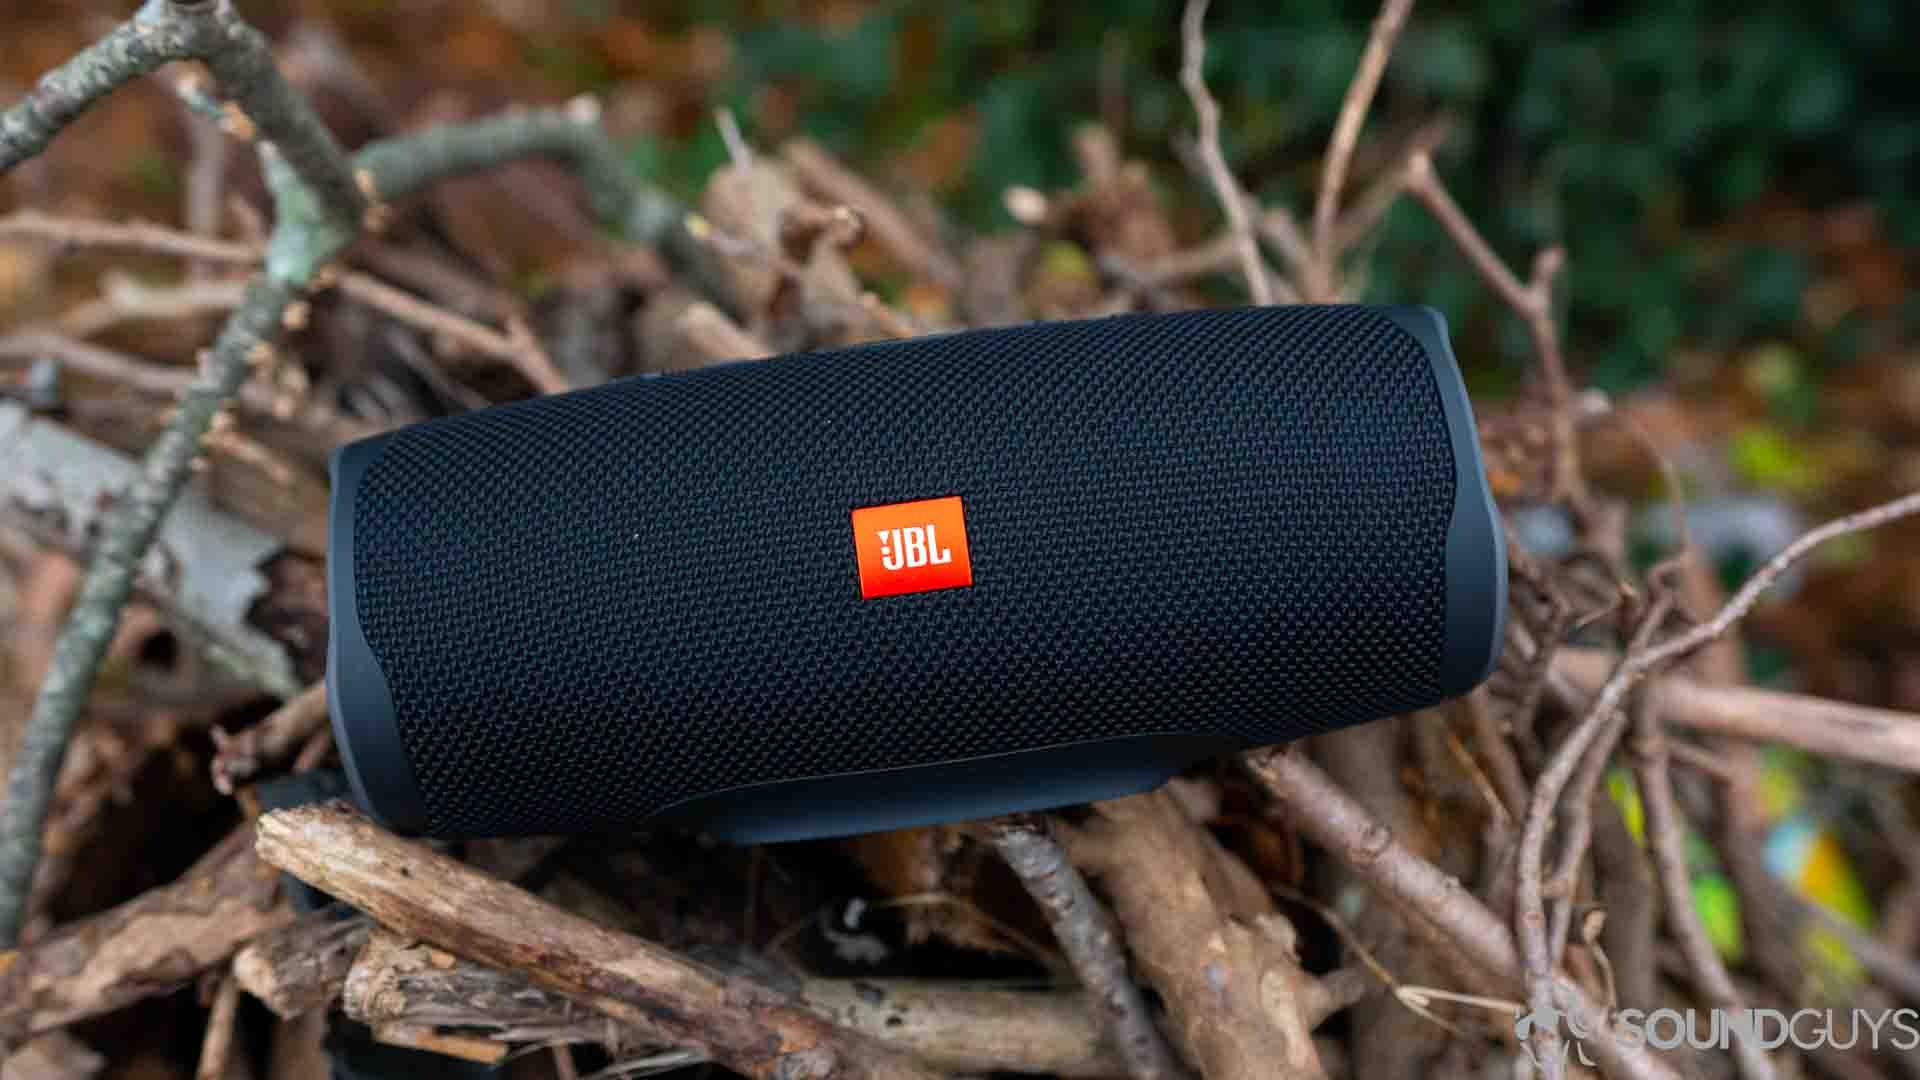 Sandalias Gruñón Menos que JBL Charge 4 review: Worth the money, kind of - SoundGuys